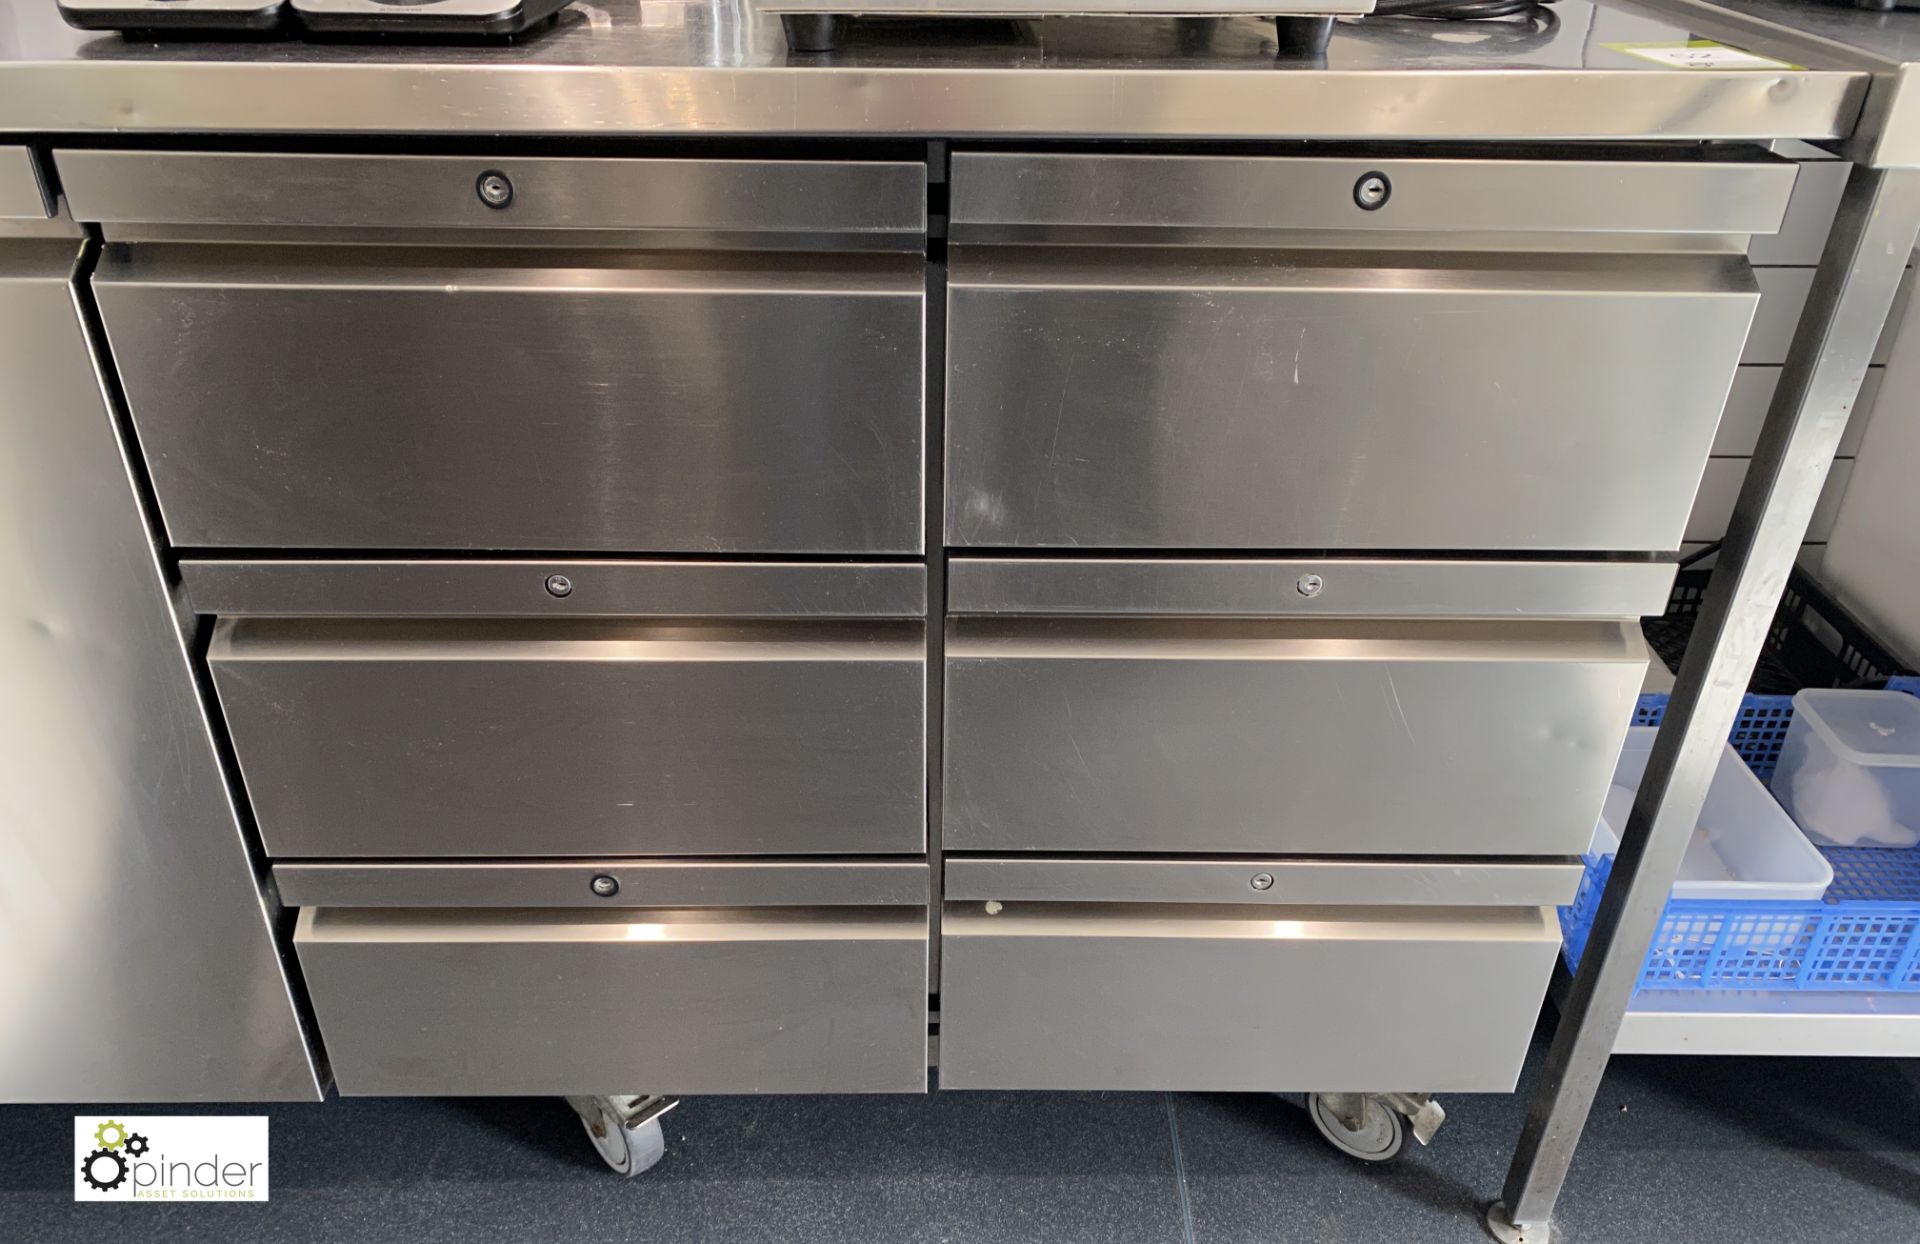 Foster mobile stainless steel multi drawer Fridge Counter, 240volts, 1860mm x 710mm x 900mm, - Image 3 of 7